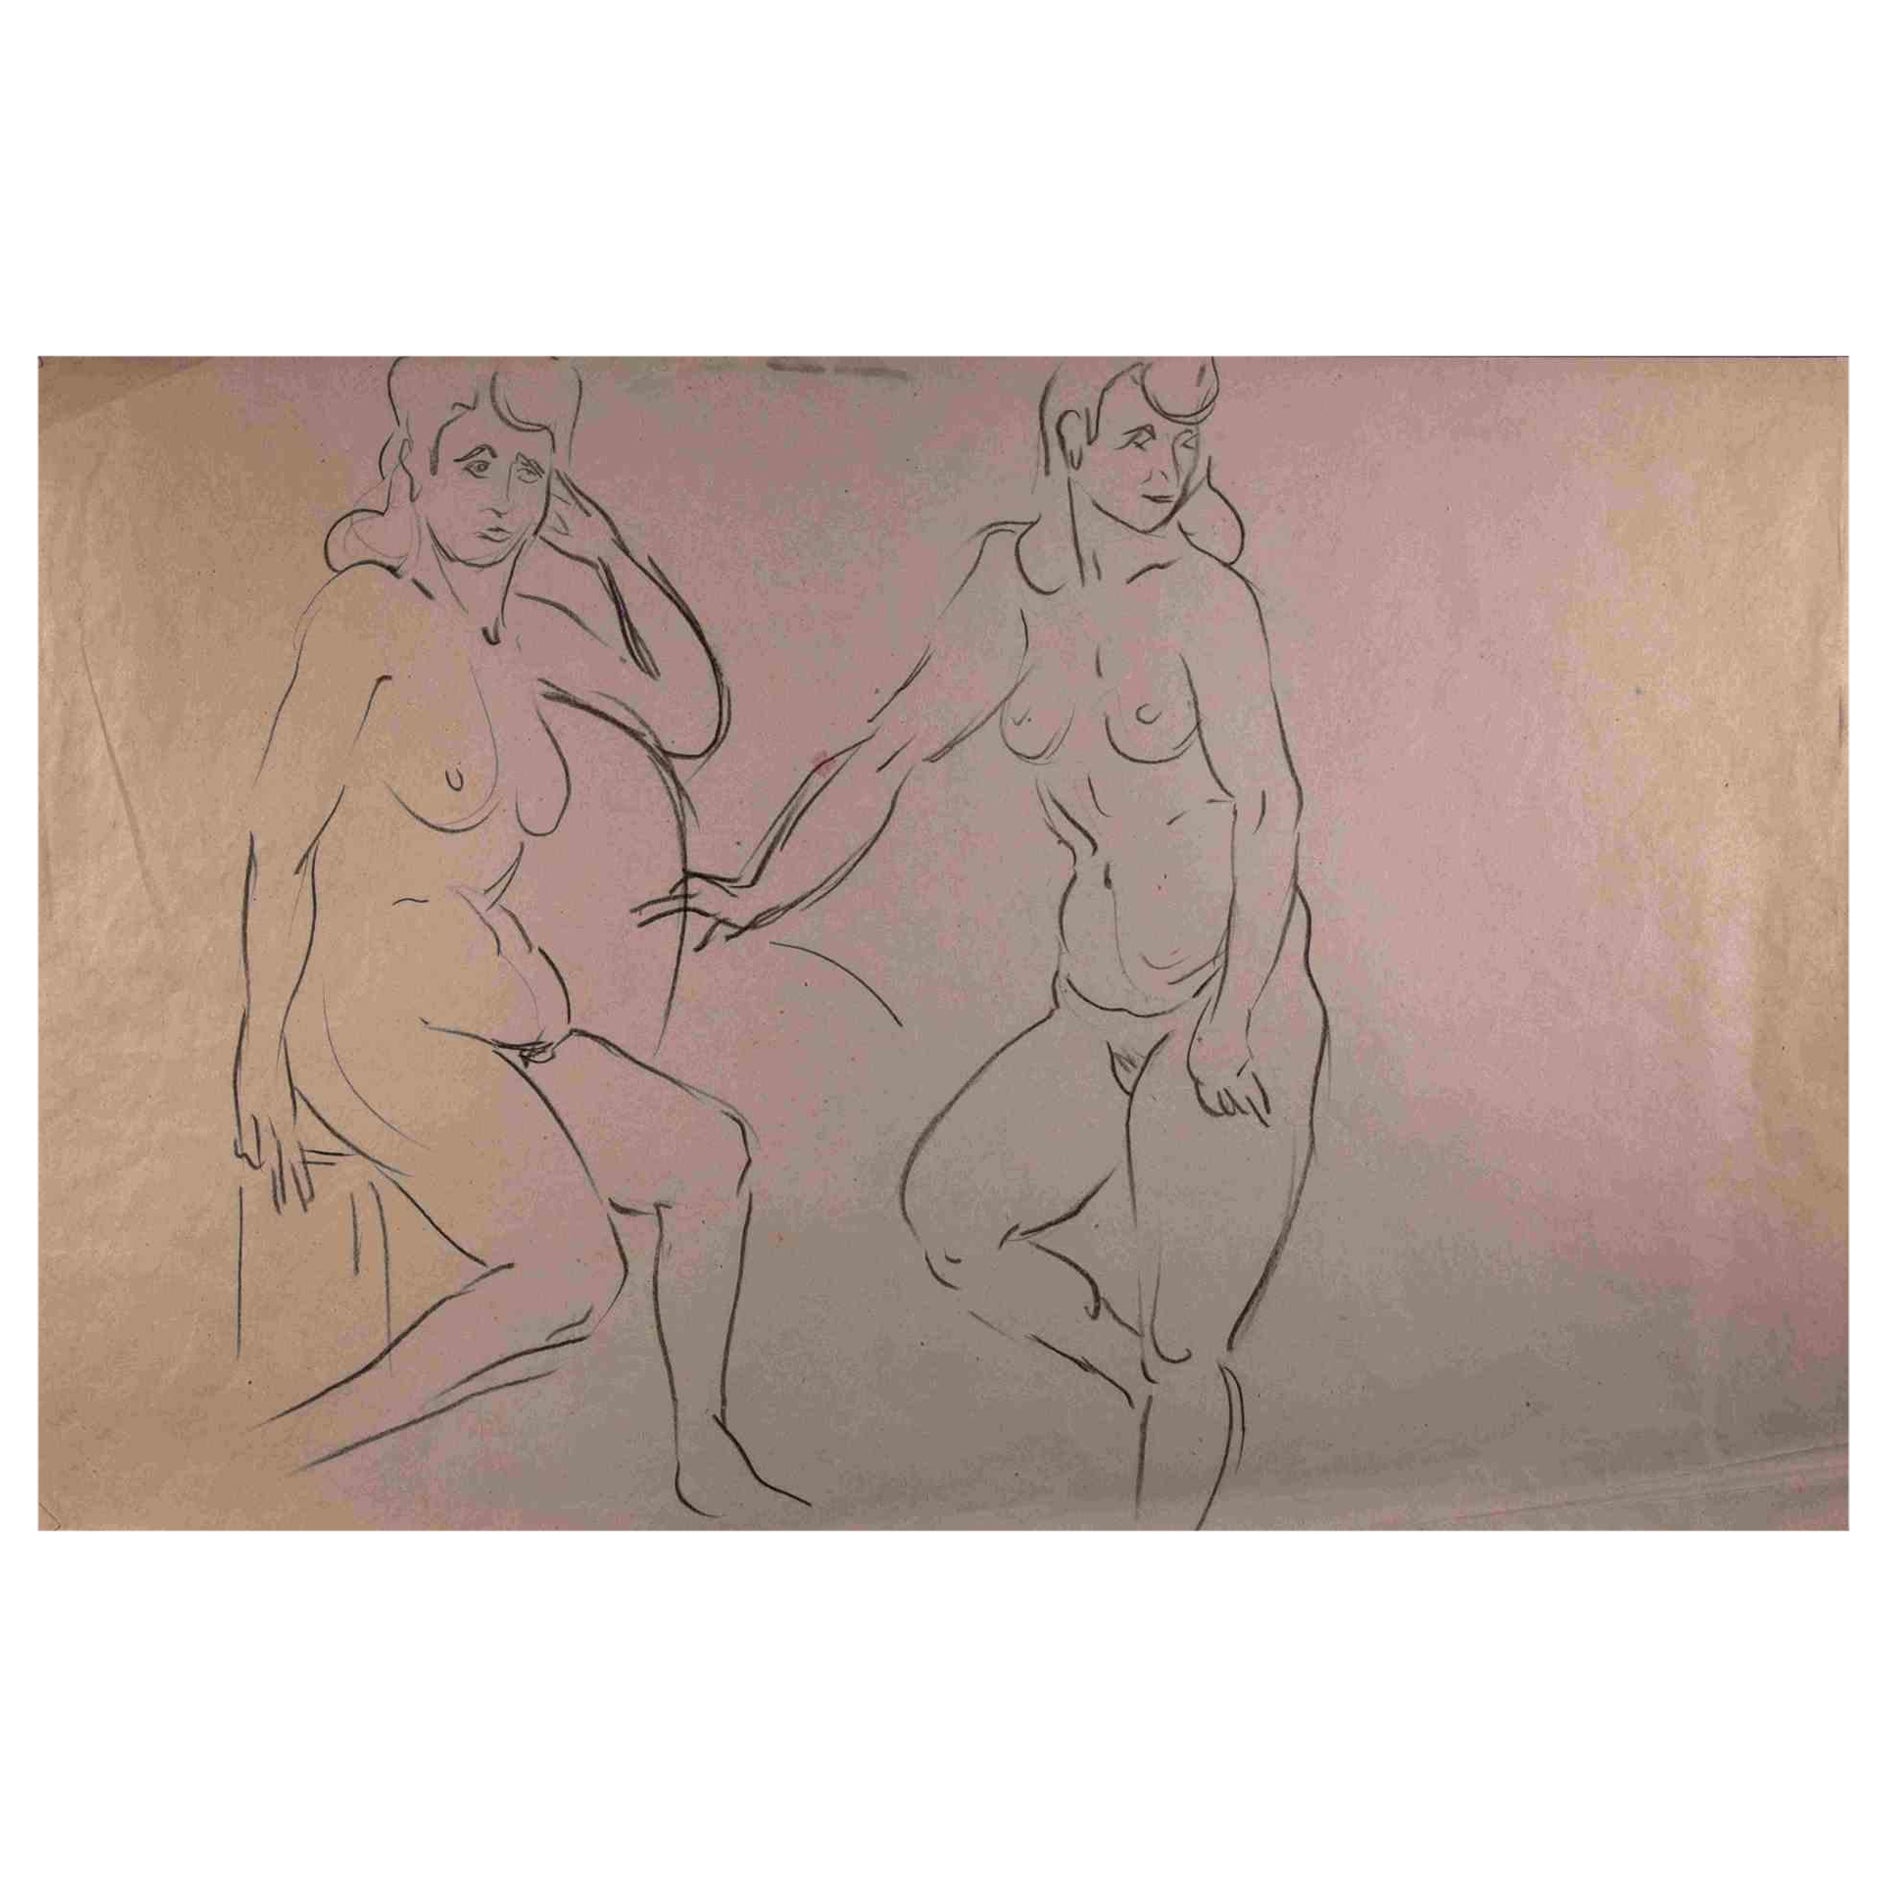 Nudes - Original Pencil Drawing on Paper - Mid 20th Century